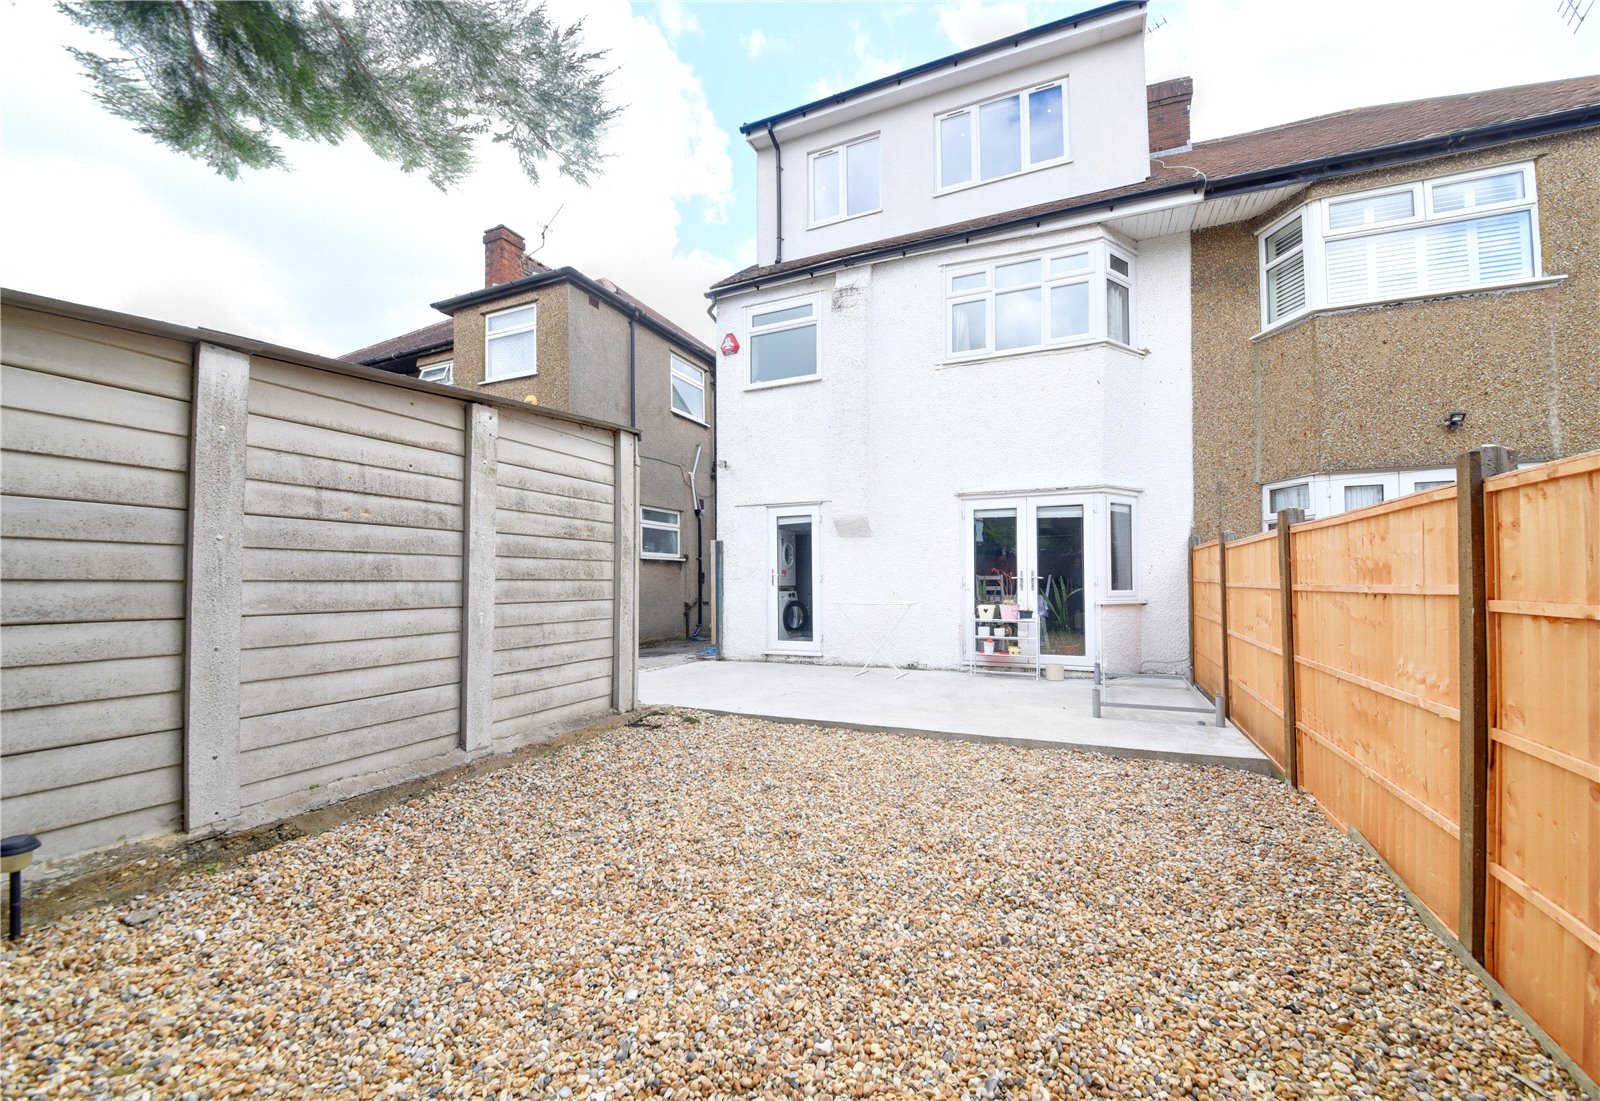 4 bed house to rent in Wycherley Crescent, New Barnet  - Property Image 14